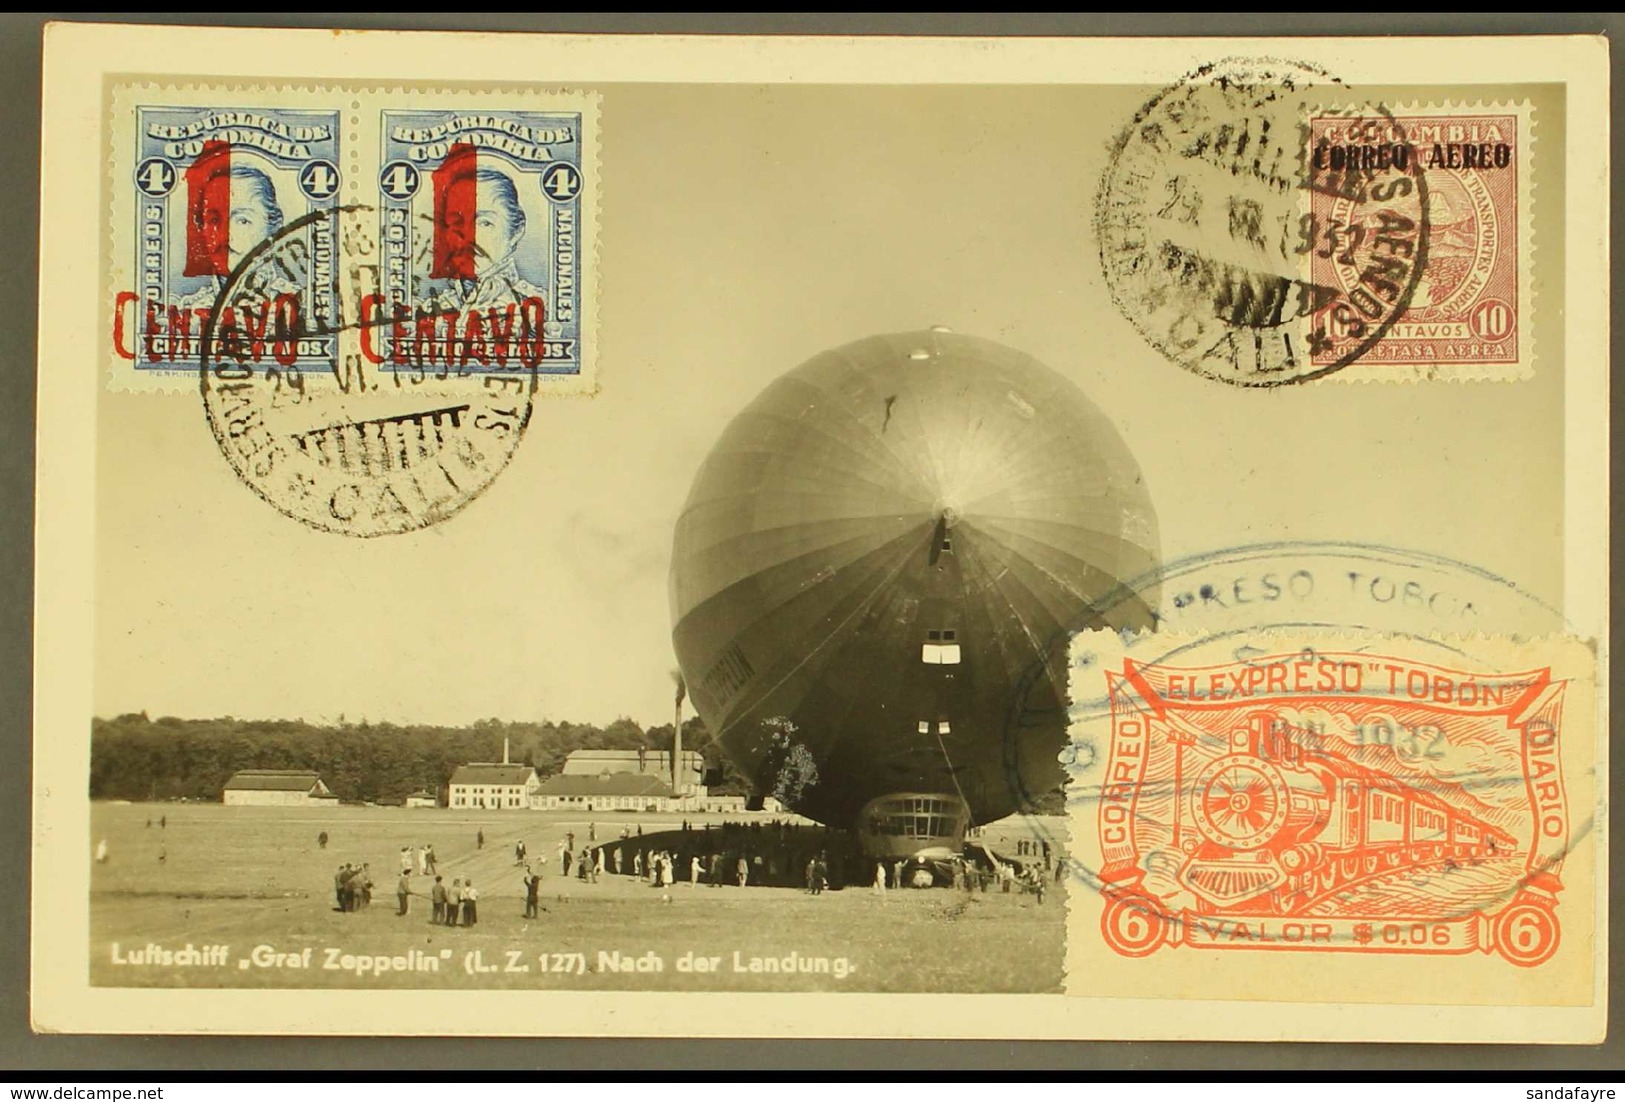 1932 PPC Of LZ127 Zeppelin Franked Colombia 1c On 4c Pair, Scadta 10c Mauve And Expreso Tobon 6c Vermilion Sent From Bog - Colombia